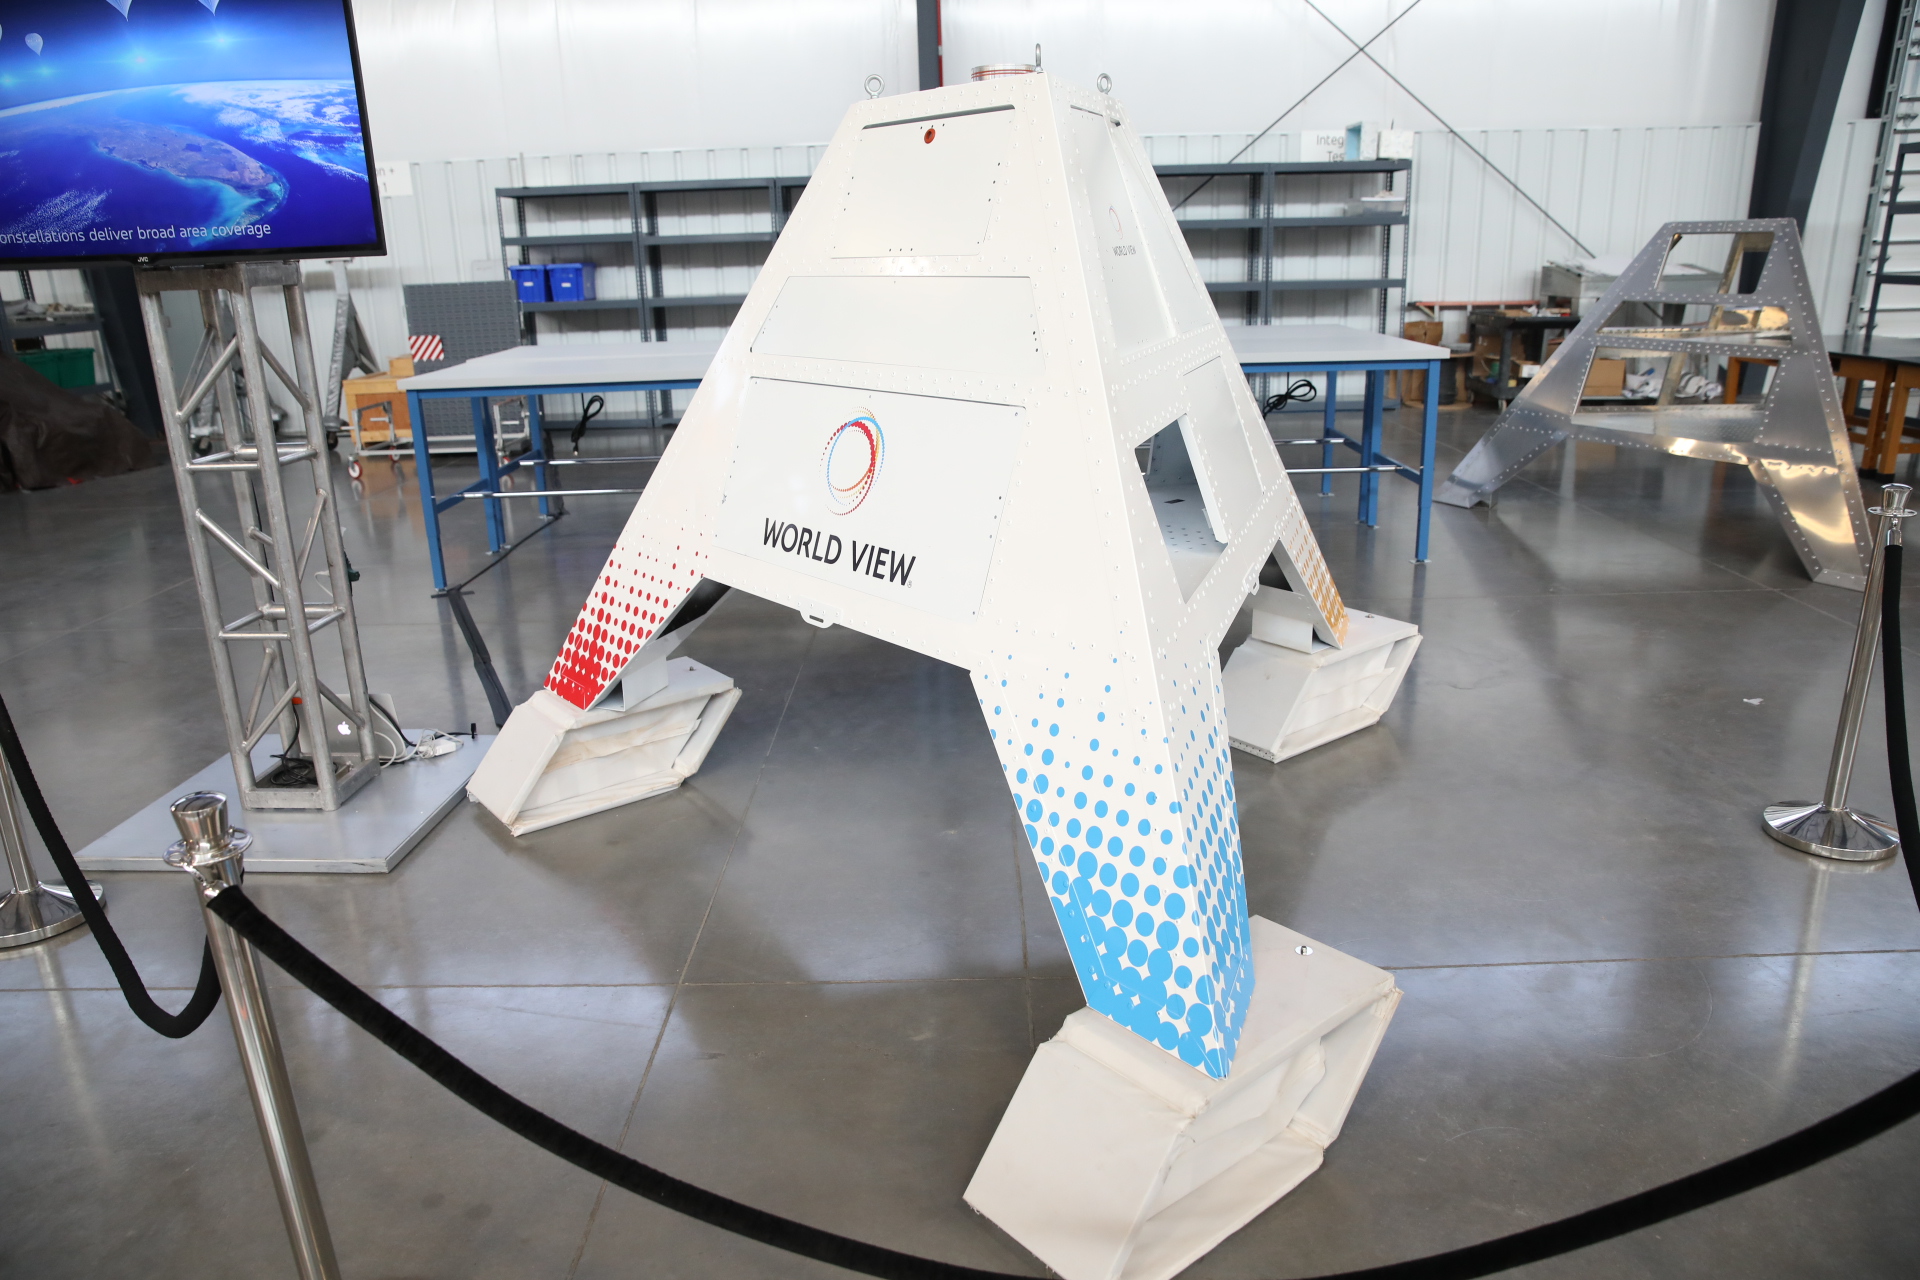 A stratollite, which can be equipped with various sensors and other payloads.